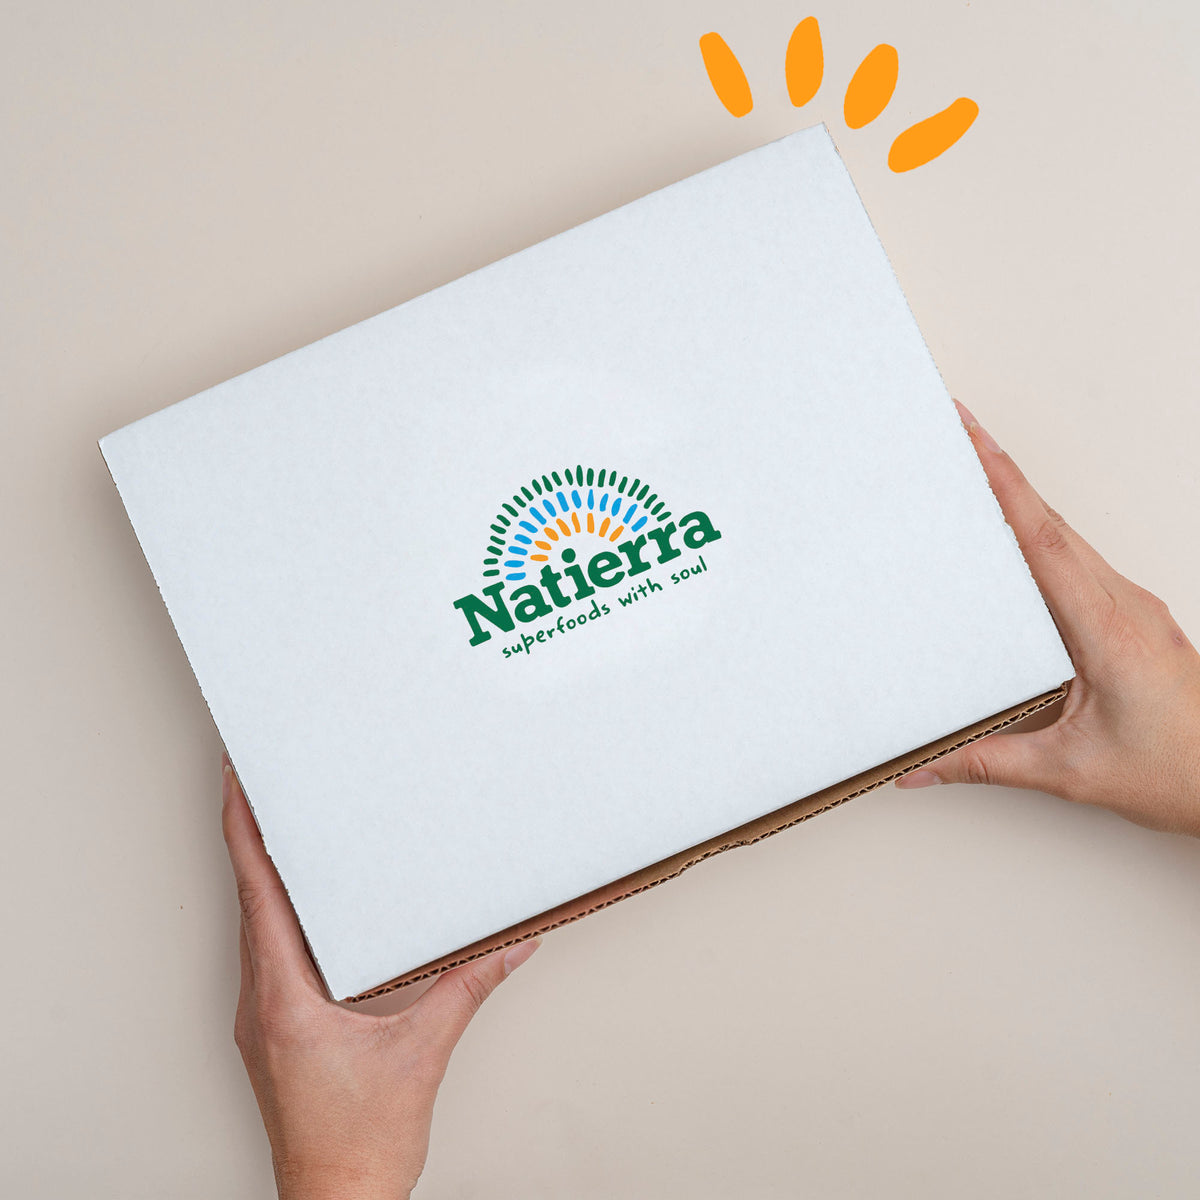 Natierra smoothie box held by 2 hands with colored beads on the top